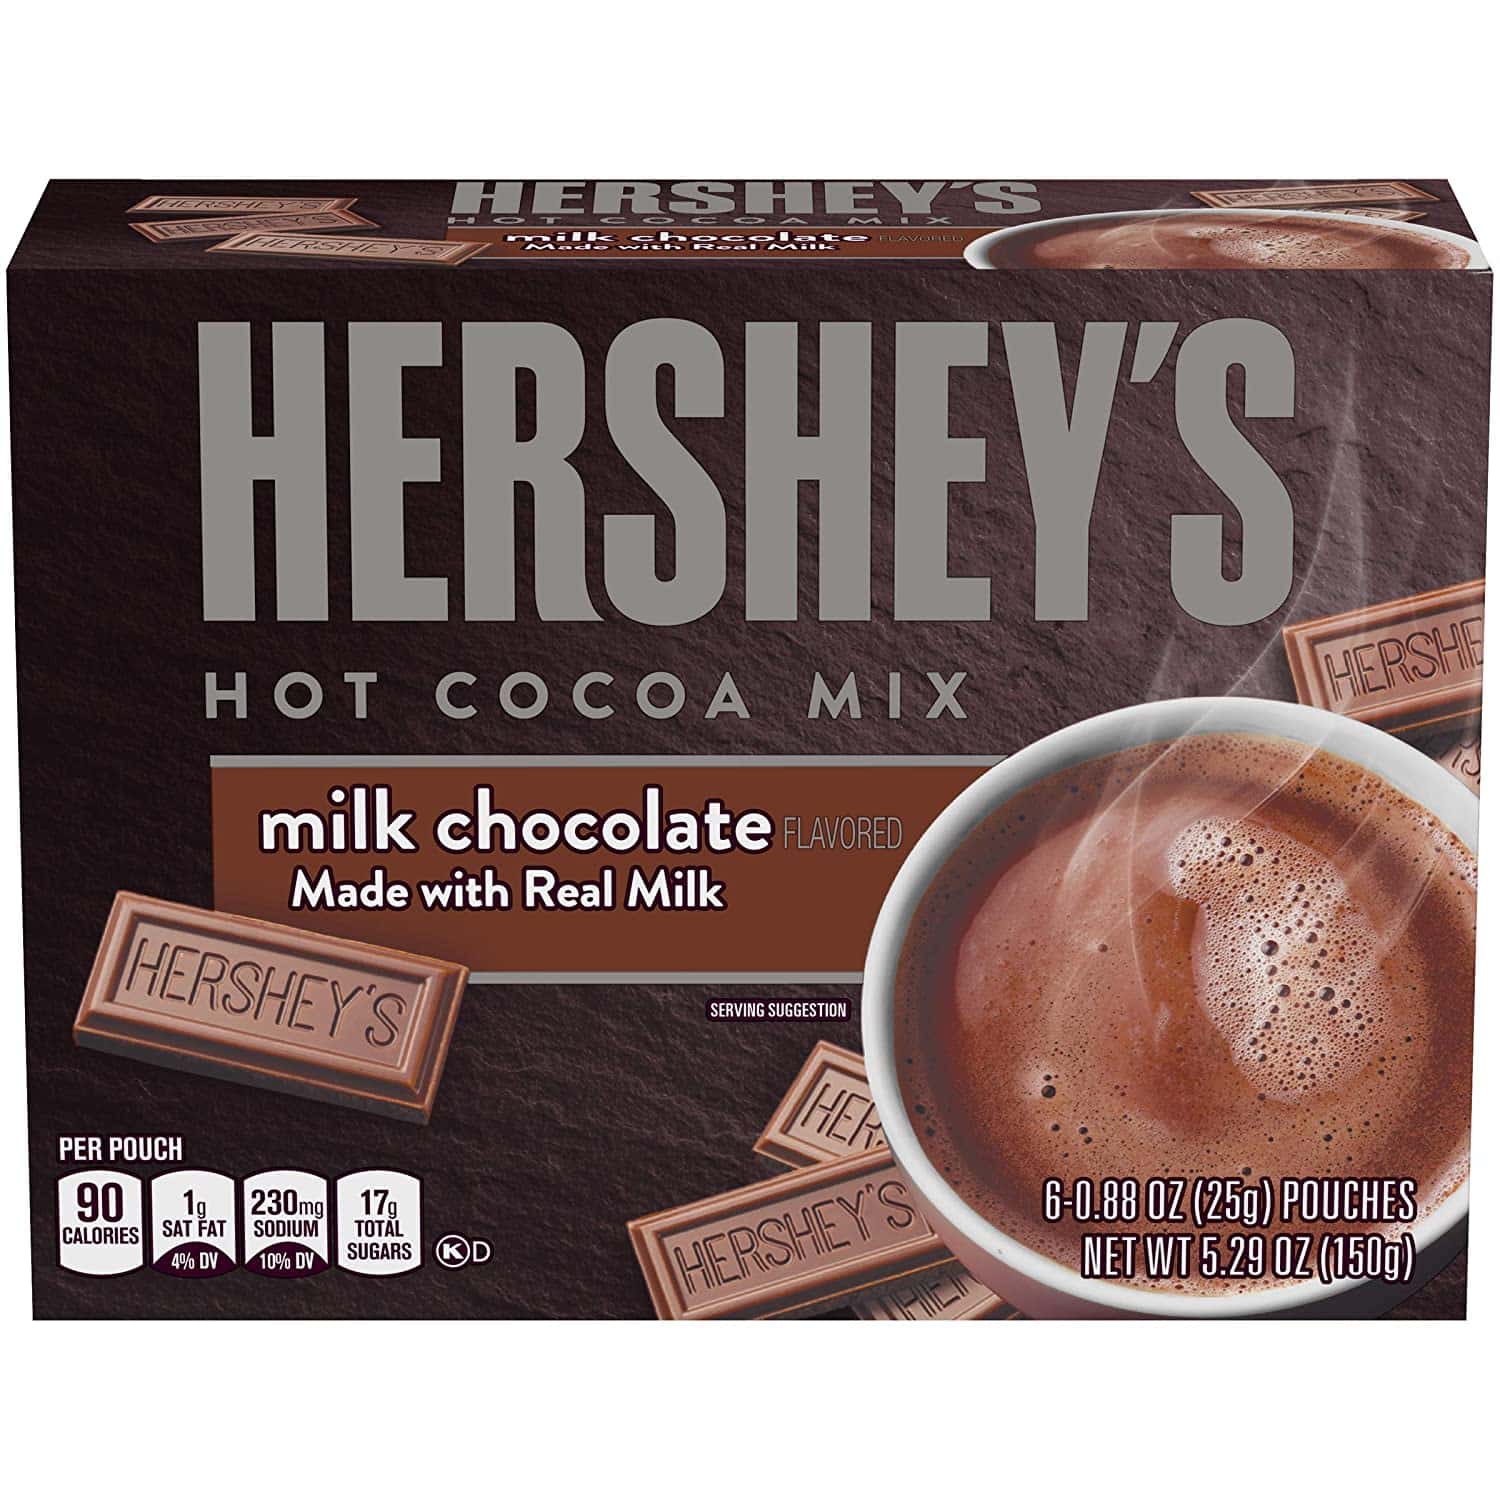 Hersheys Milk Chocolate, Hot Cocoa Mix, (6 Pouches), 0.88 Ounce ...